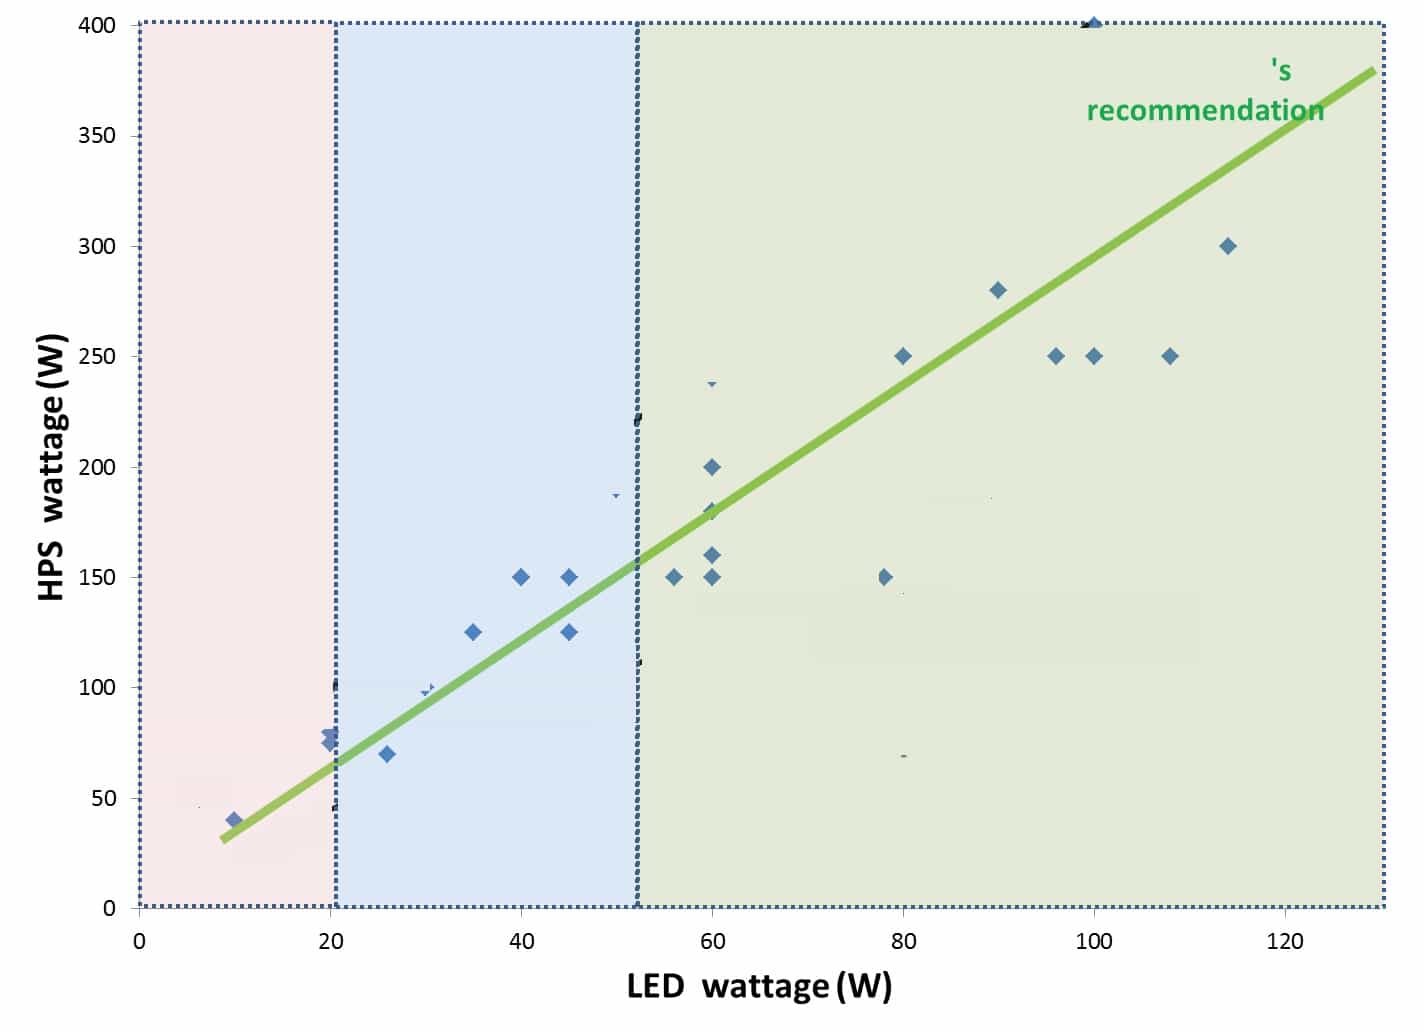 Led-wattage Comparison between Solar LED light and Conventional light